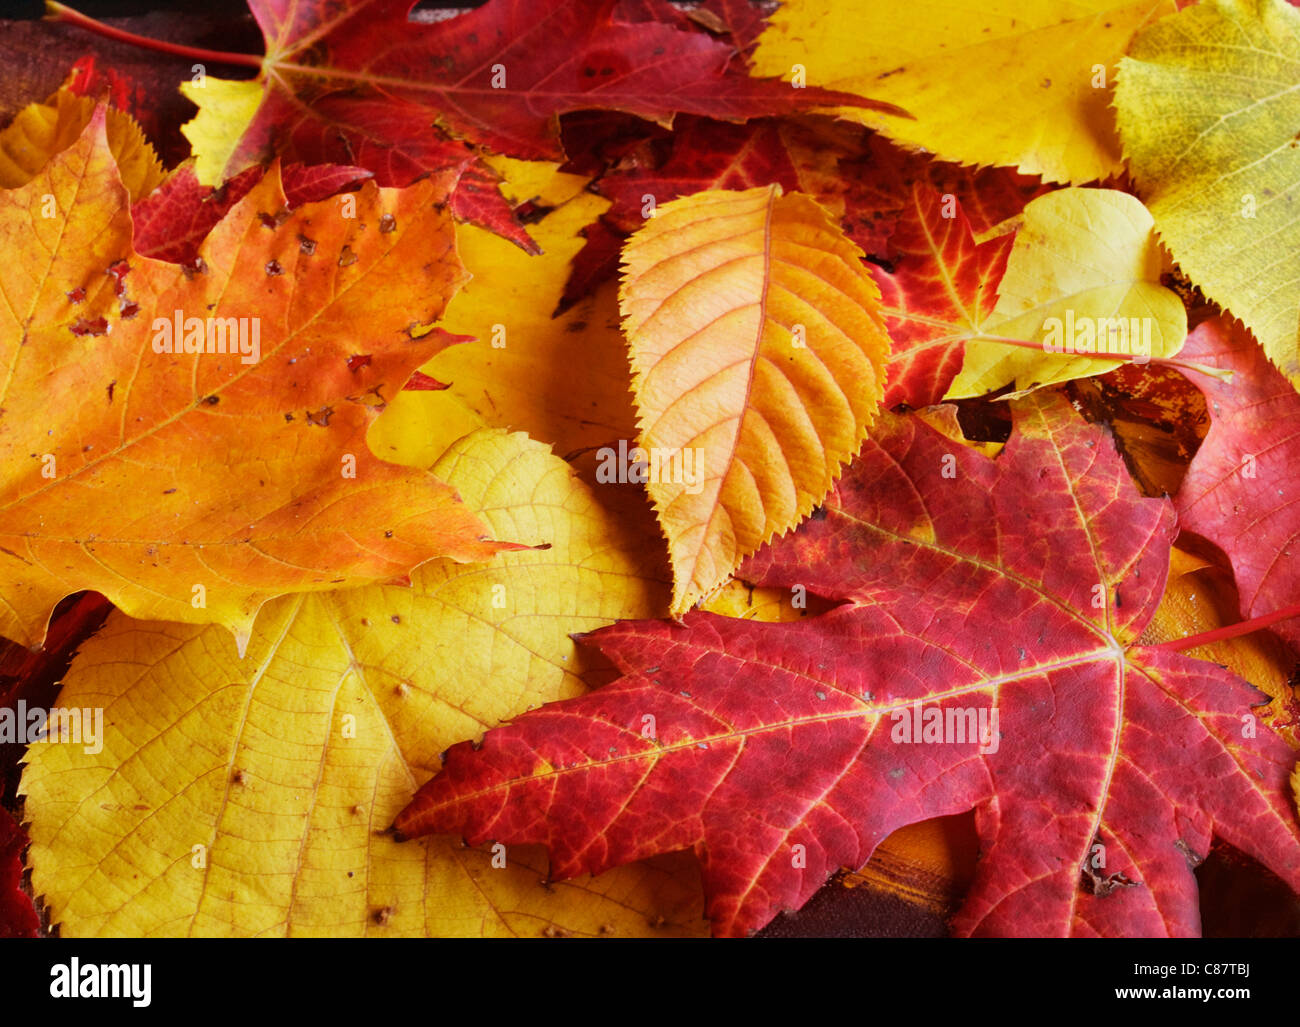 Colorful backround of fallen autumn leaves Stock Photo